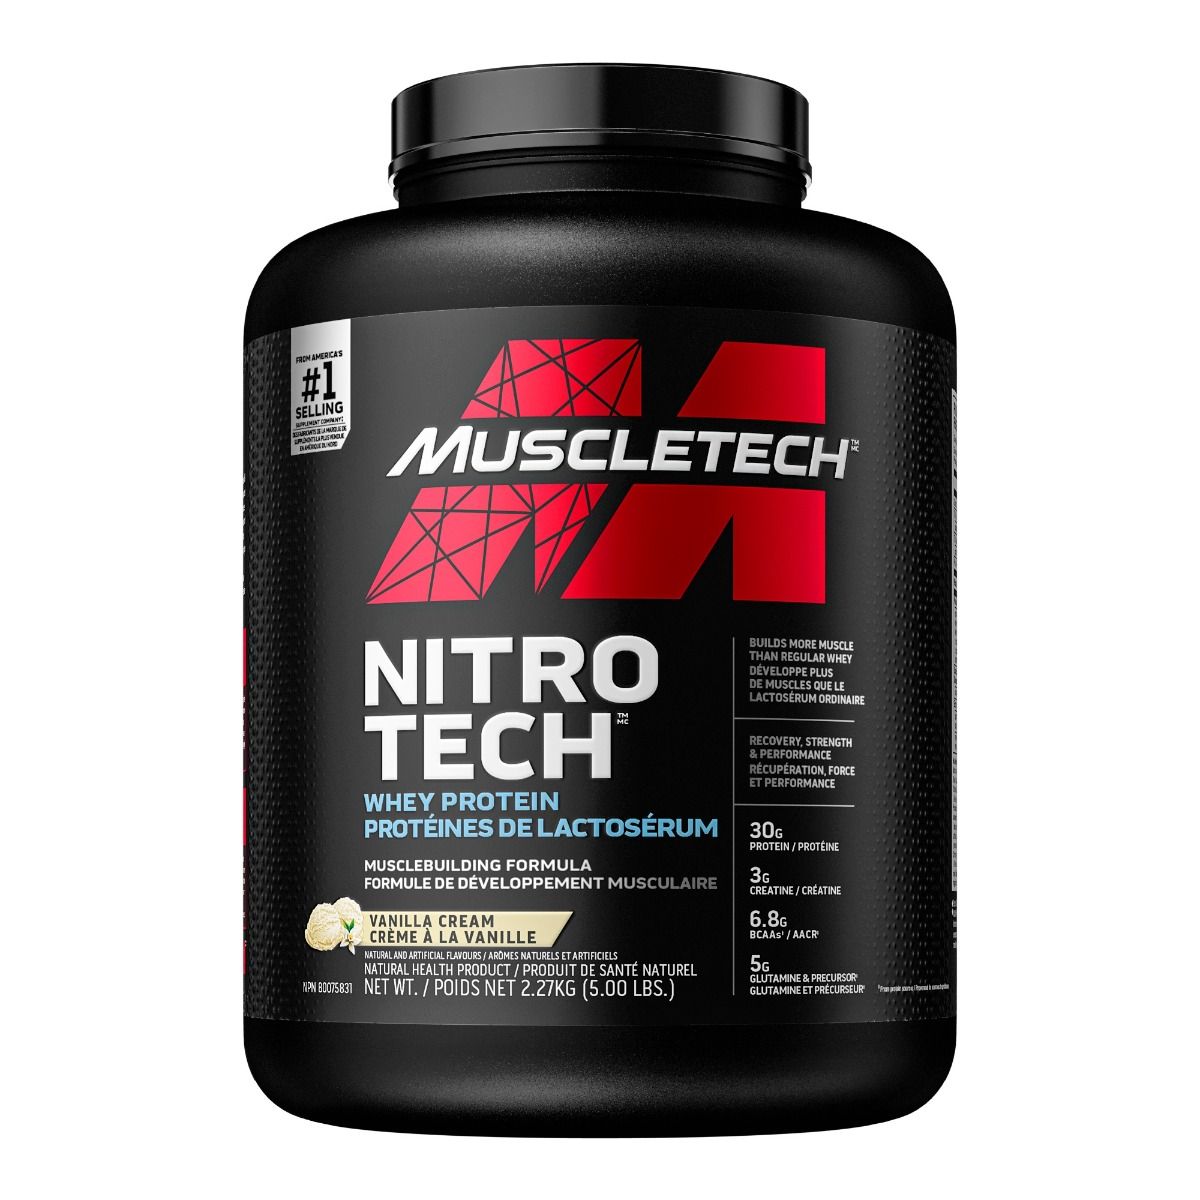 MuscleTech Nitro-Tech (5 lbs) muscletech-nitro-tech-whey-isolate-lean-muscle-builder-1 Whey Protein Vanilla MuscleTech